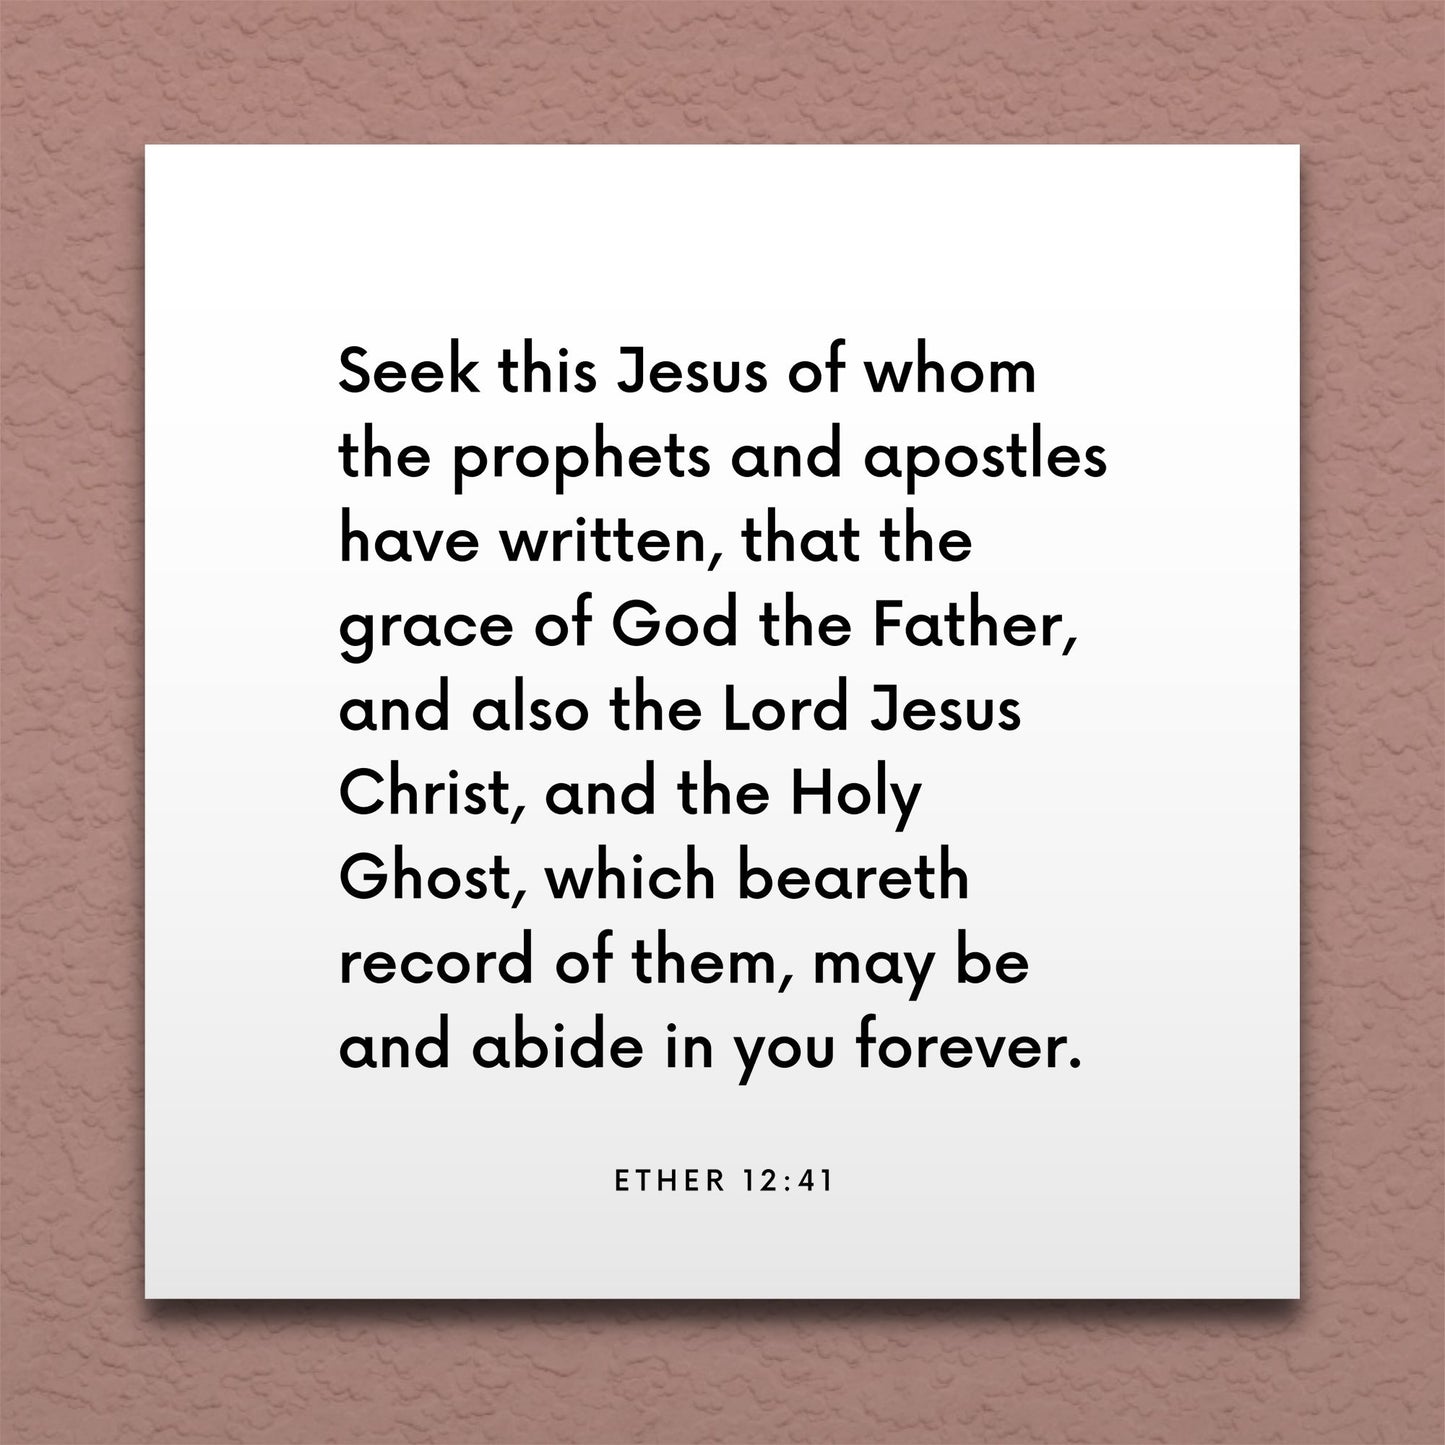 Wall-mounted scripture tile for Ether 12:41 - "Seek this Jesus of whom the prophets have written"